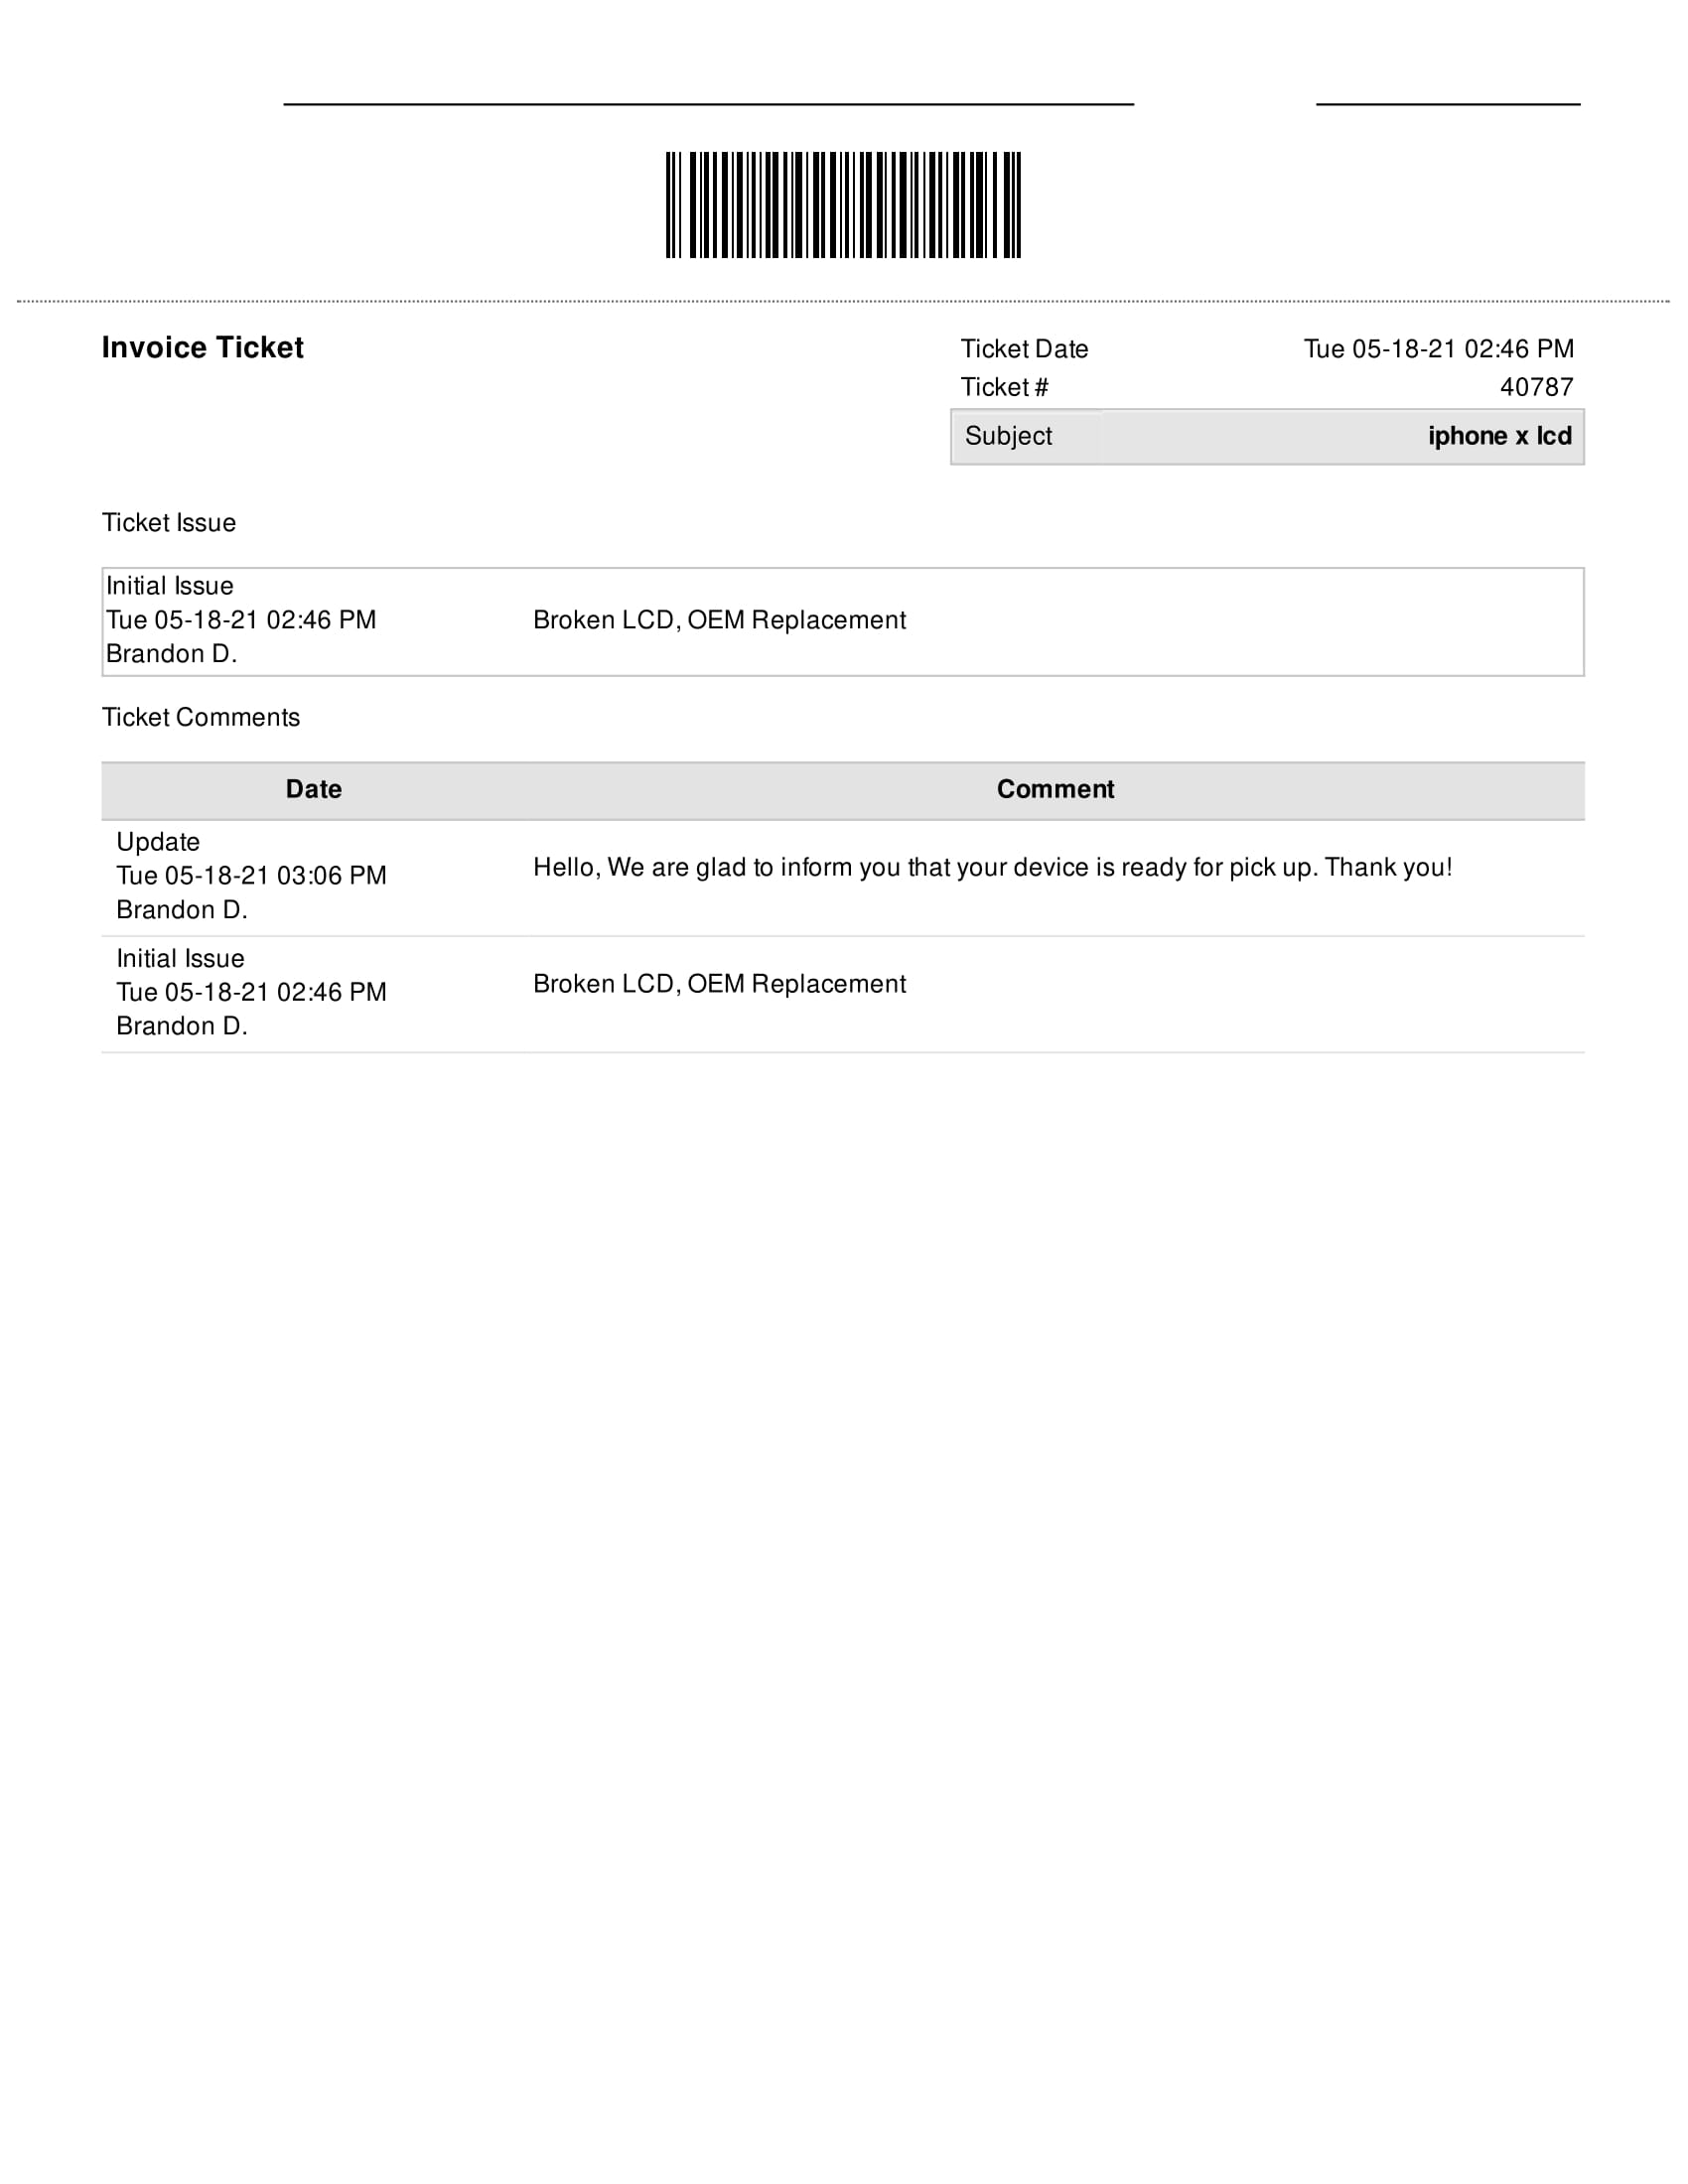 My  Invoice with the 180 days warranty  [2 of 2]